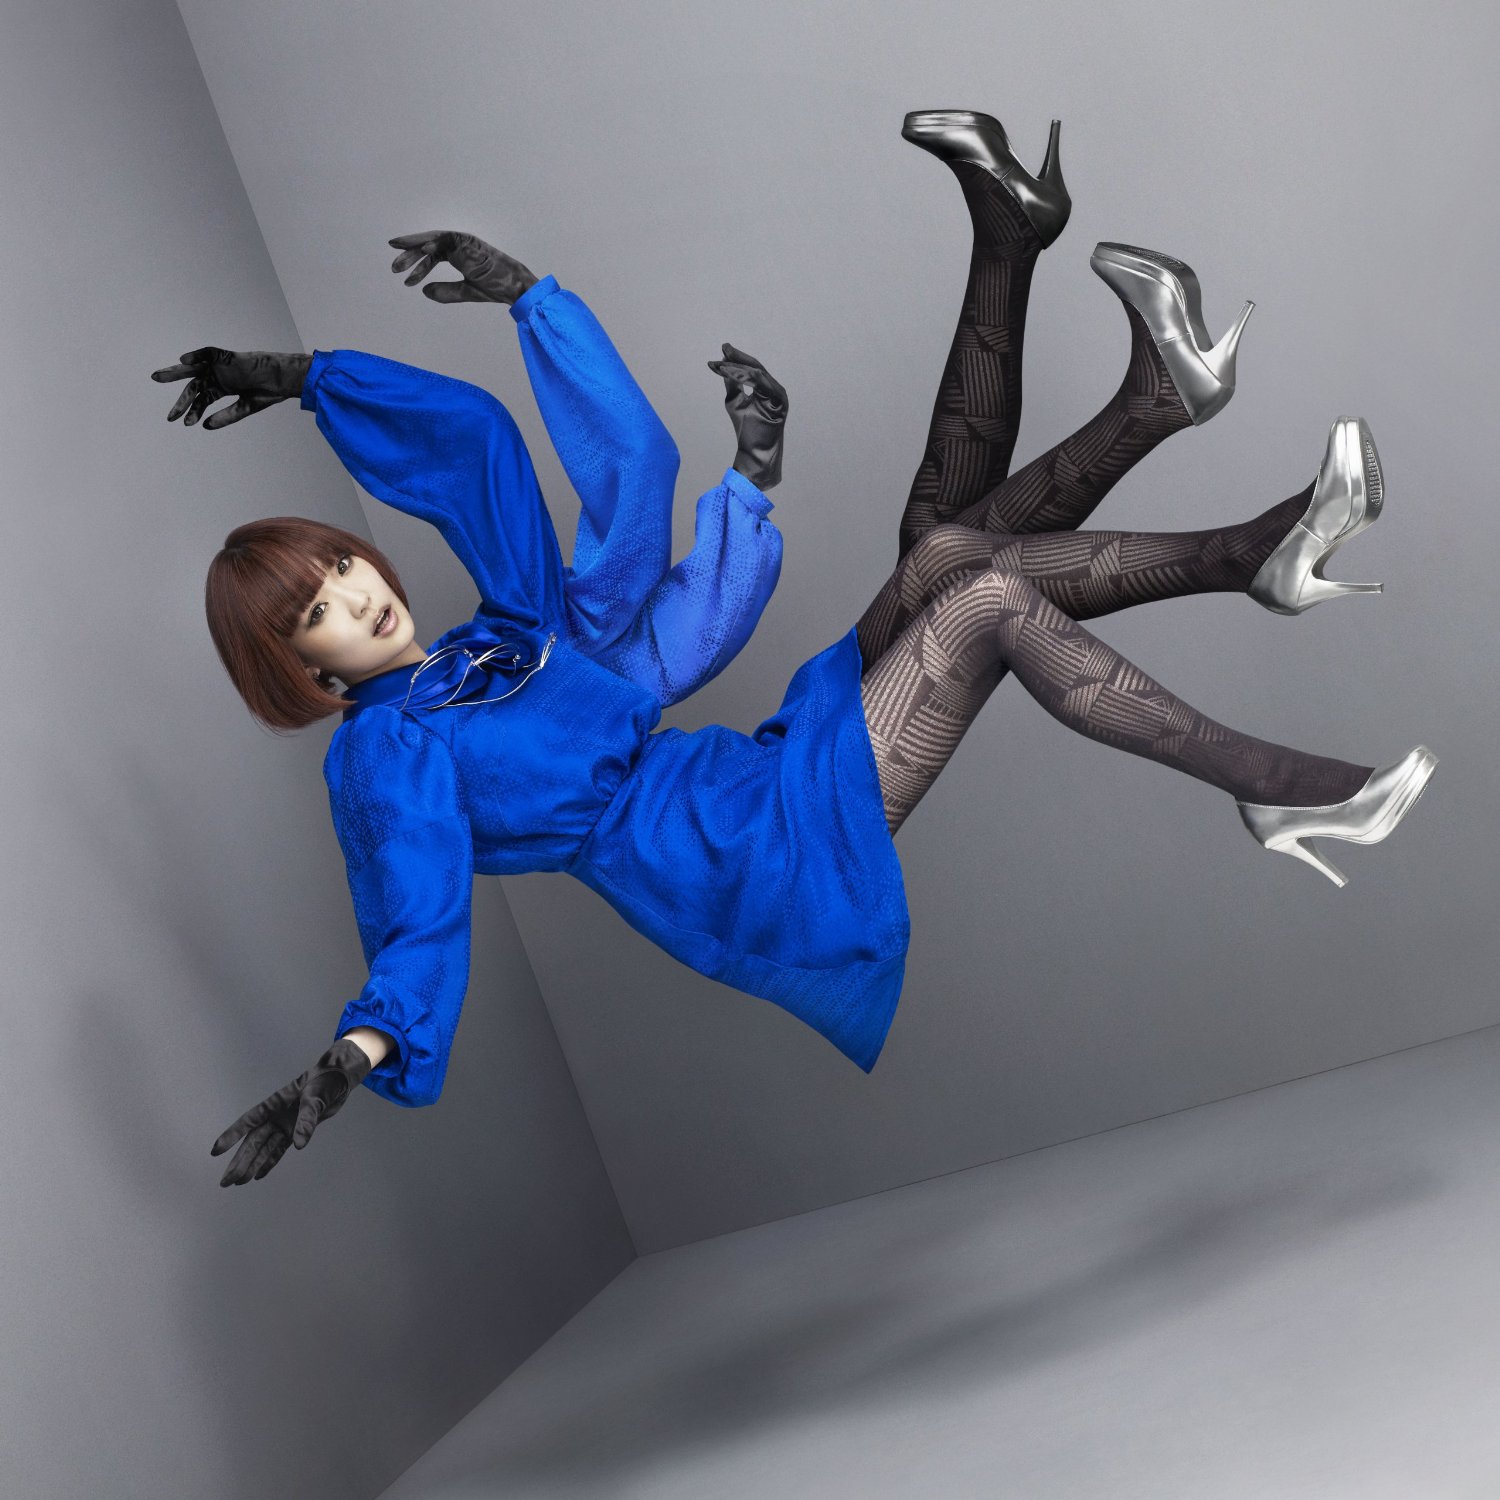 New Album from Yun*chi